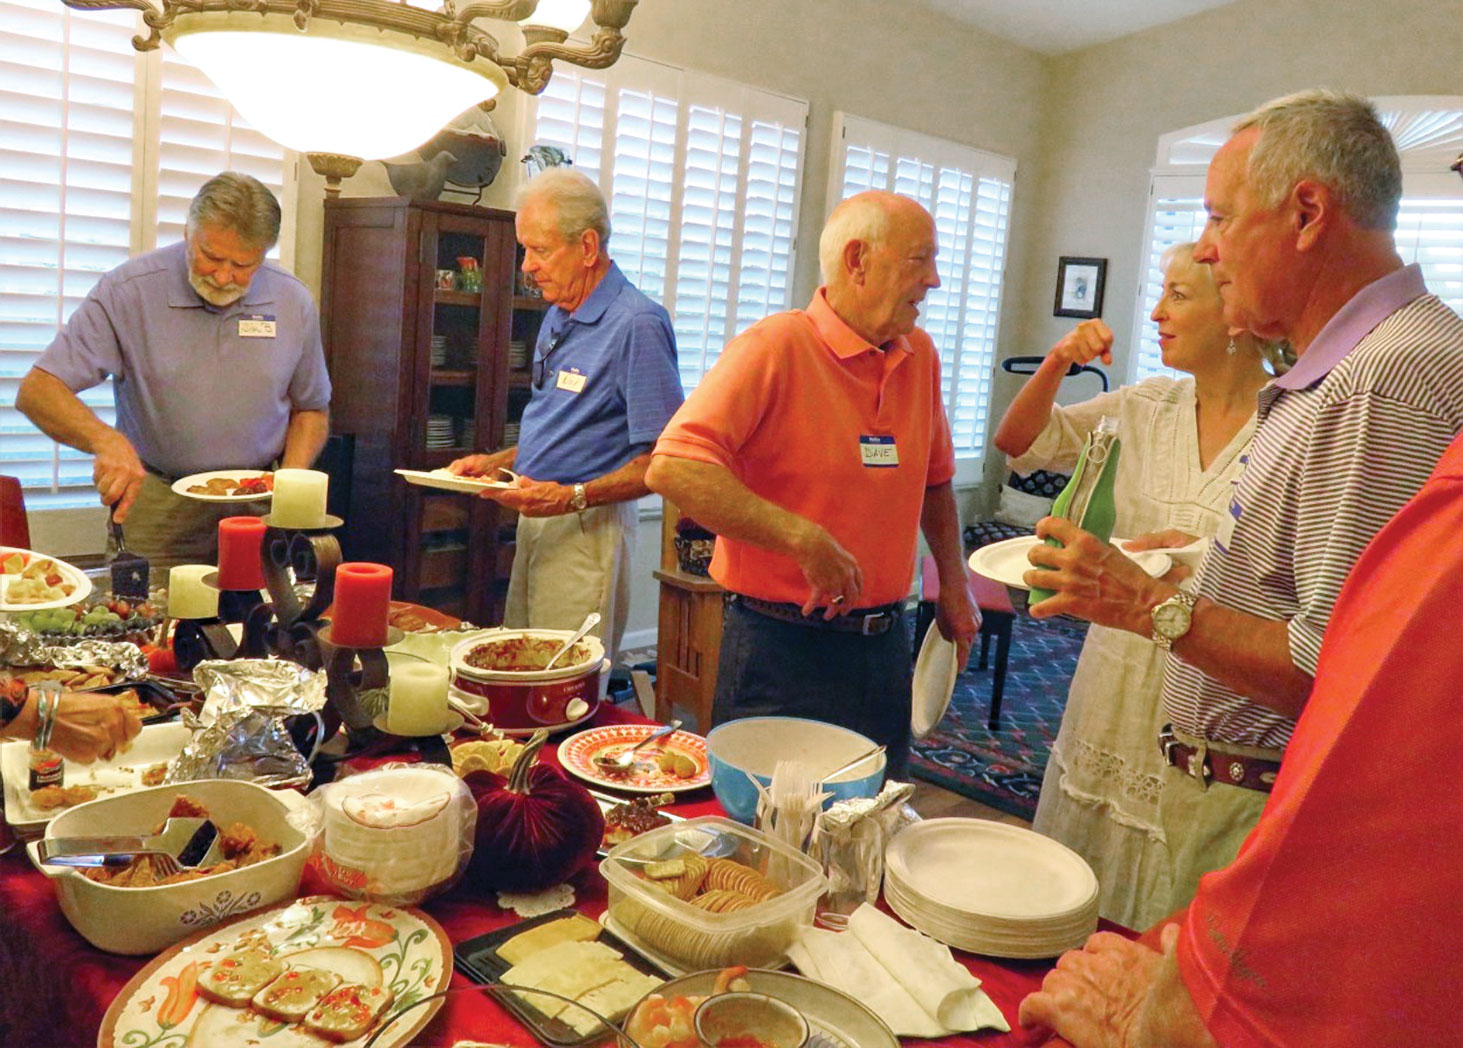 Snacks and chatting at the Grinstead house; photo by Ron Talbot